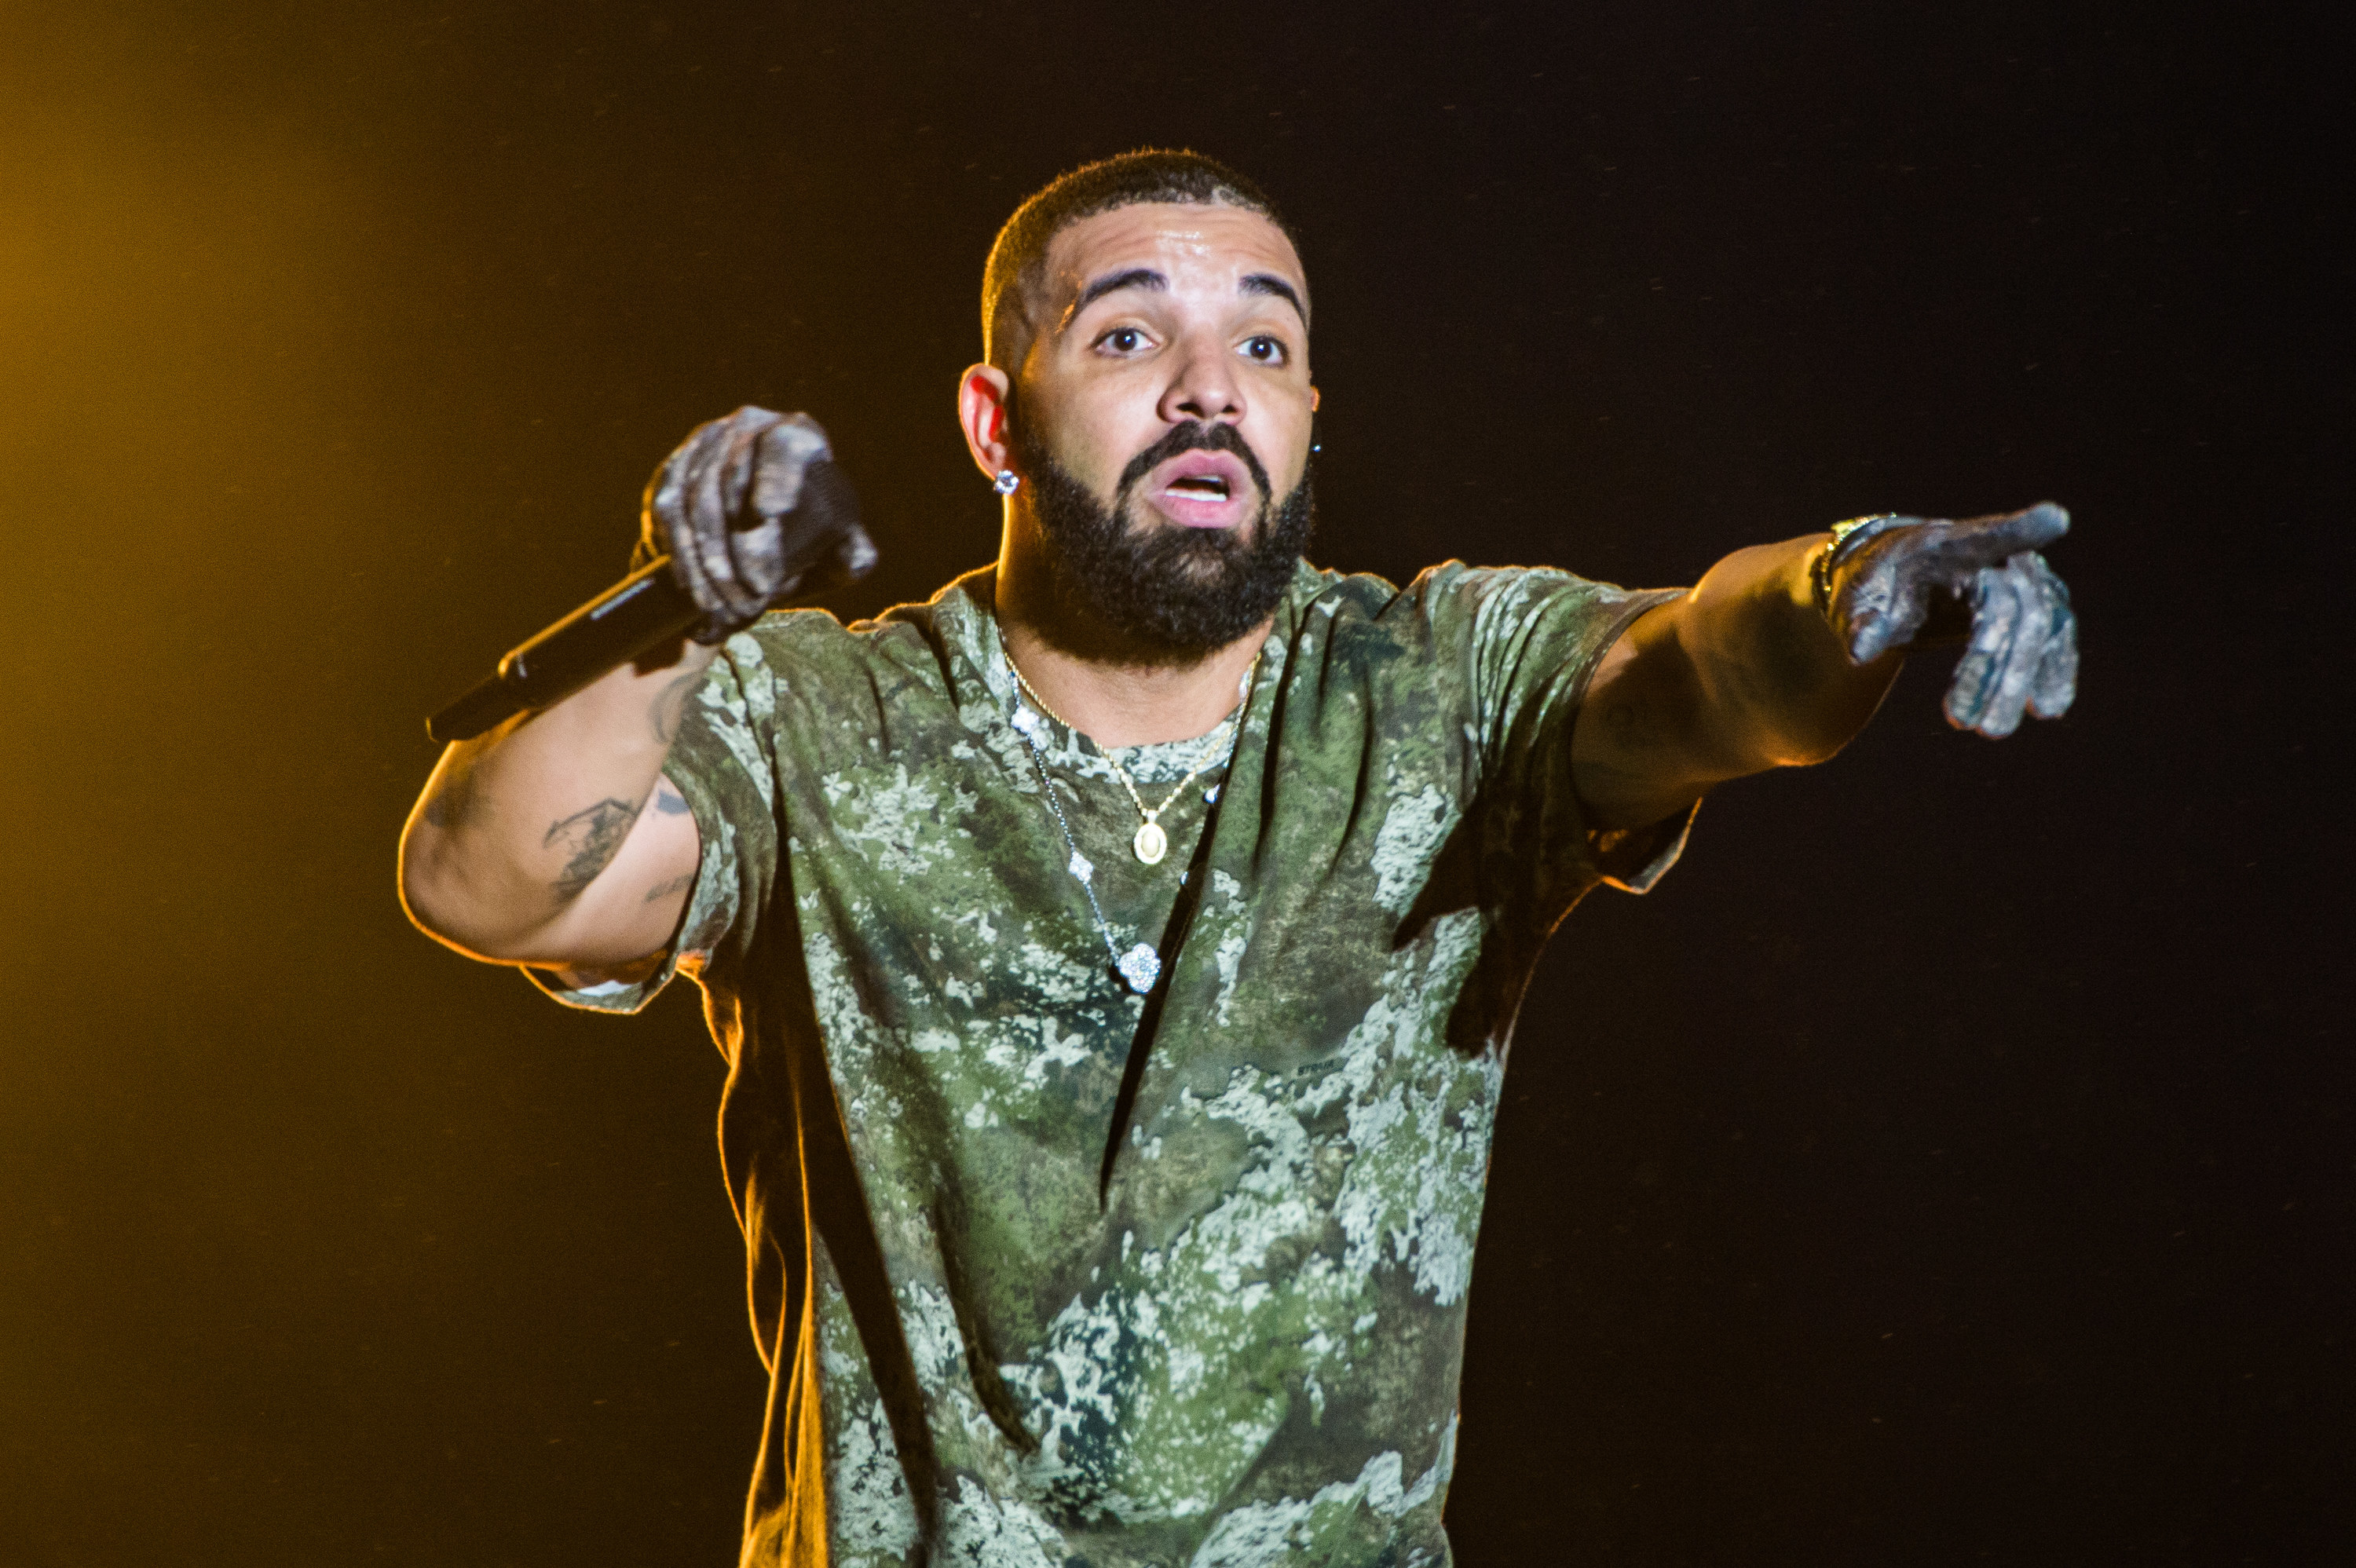 Drake performs surprise set on Day 1 of Wireless Festival 2021 at Crystal Palace on Sept. 10, 2021, in London